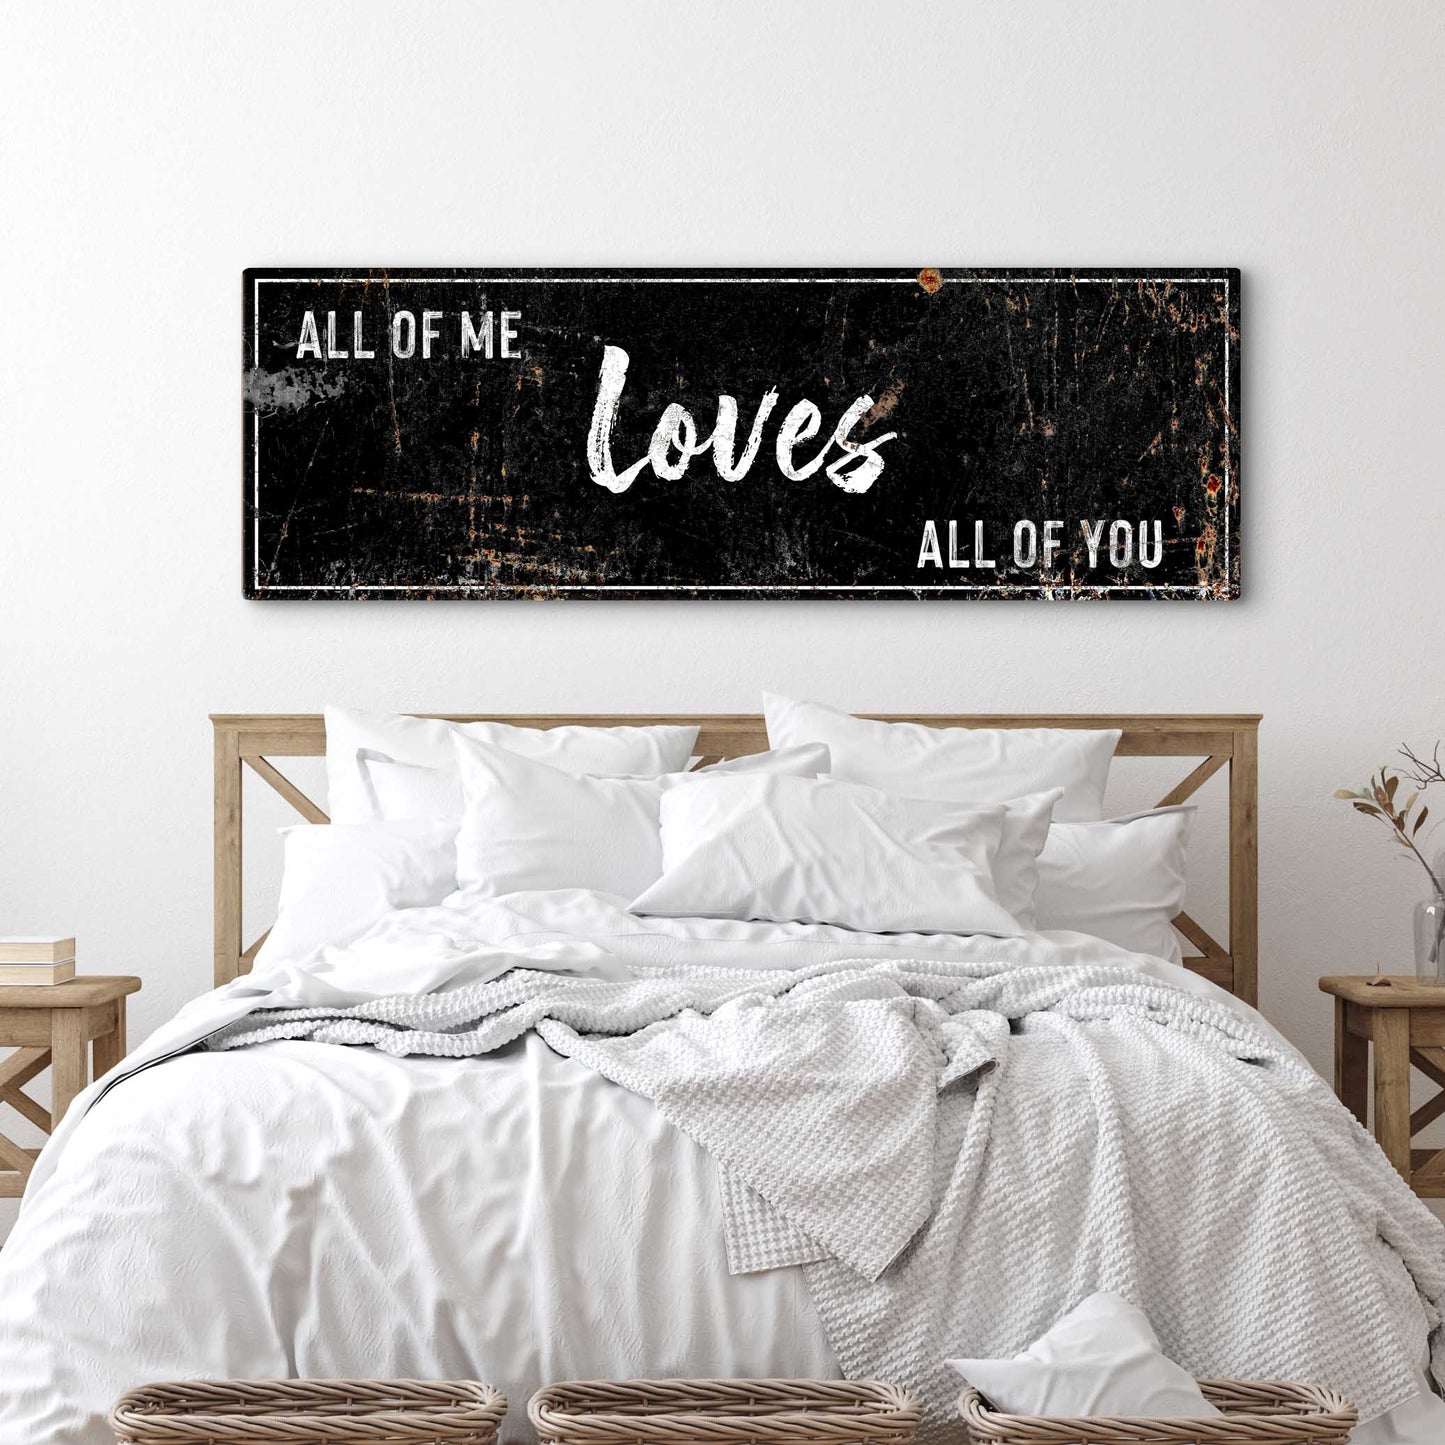 All of me loves all of you Rustic Bedroom Style 2 - Image by Tailored Canvases